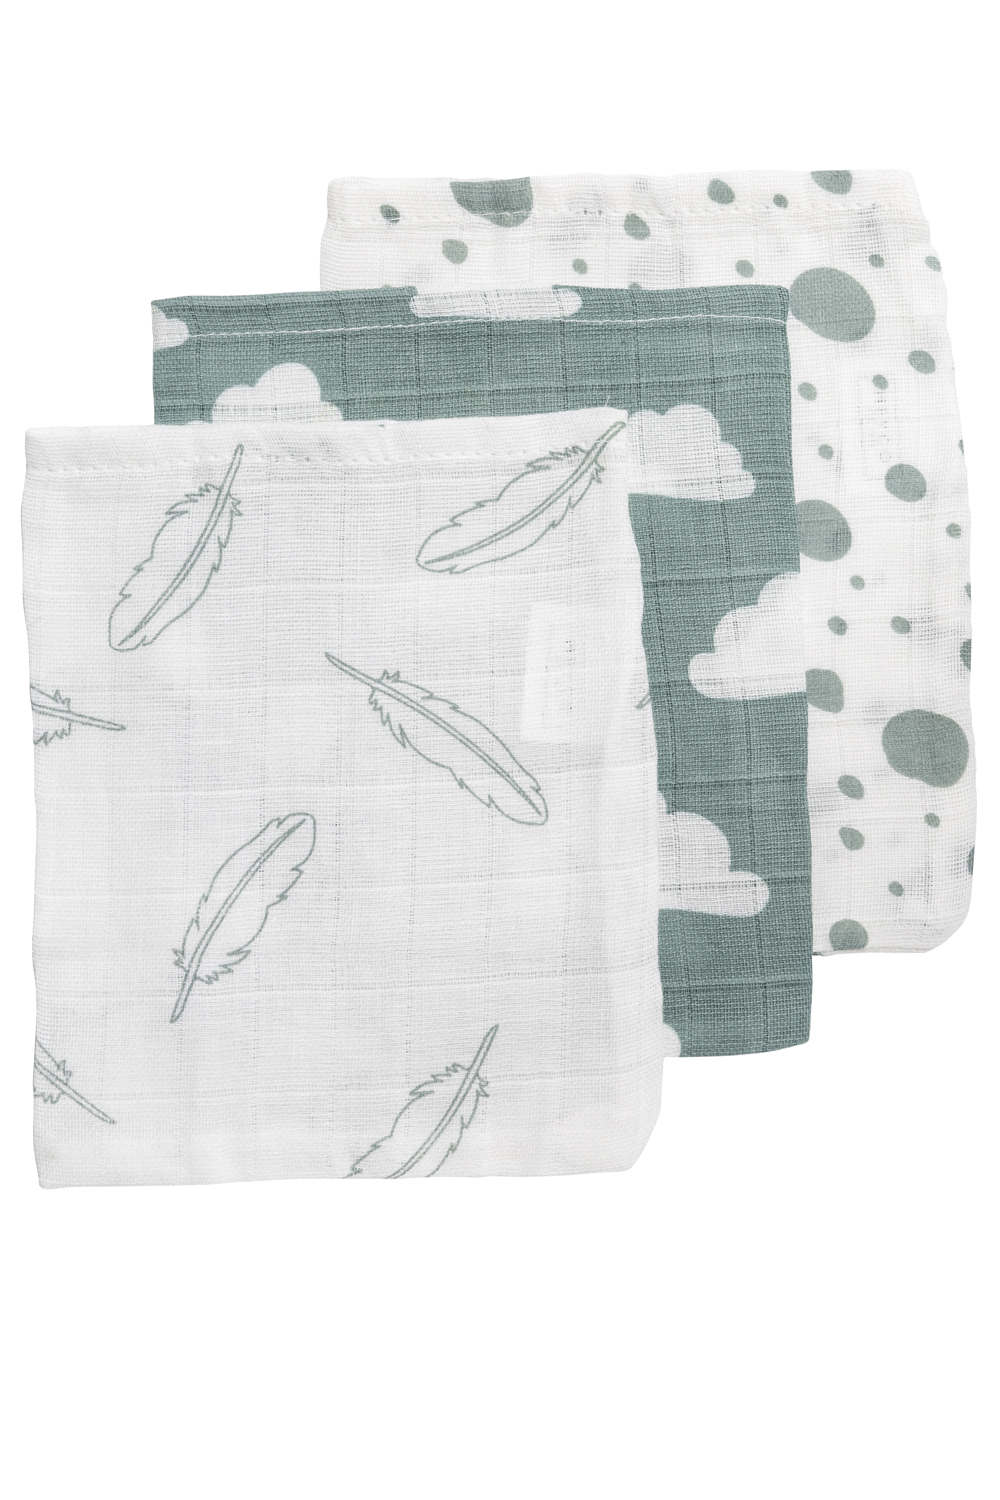 Muslin Wash Mitts 3-Pack Feathers-Clouds-Dots - Stone Green/White - 20X17cm